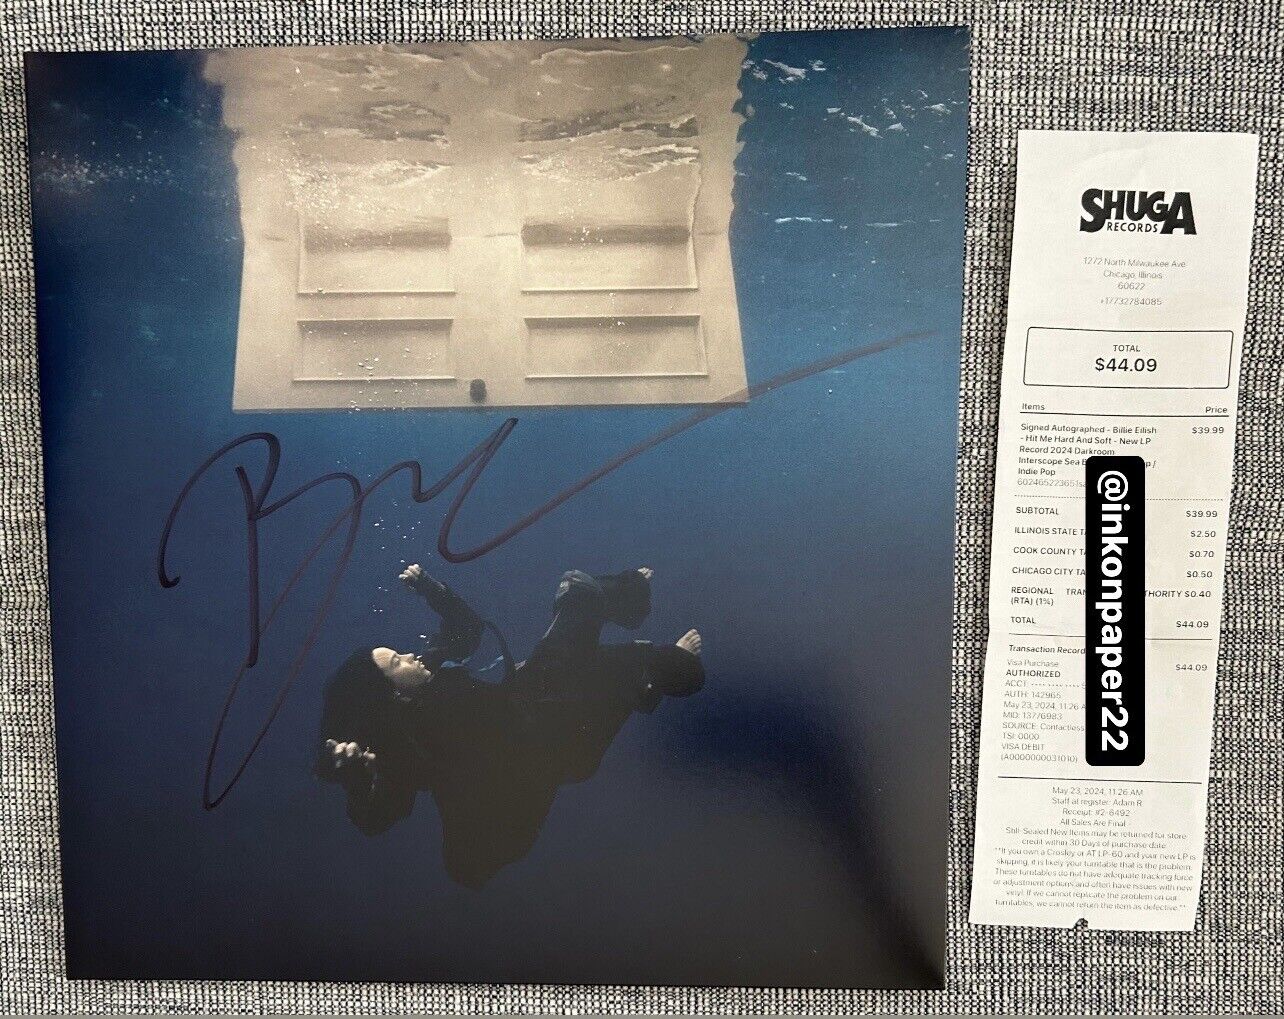 BILLIE EILISH SIGNED HIT ME HARD AND SOFT VINYL (SIGNED ON ACTUAL VINYL COVER)